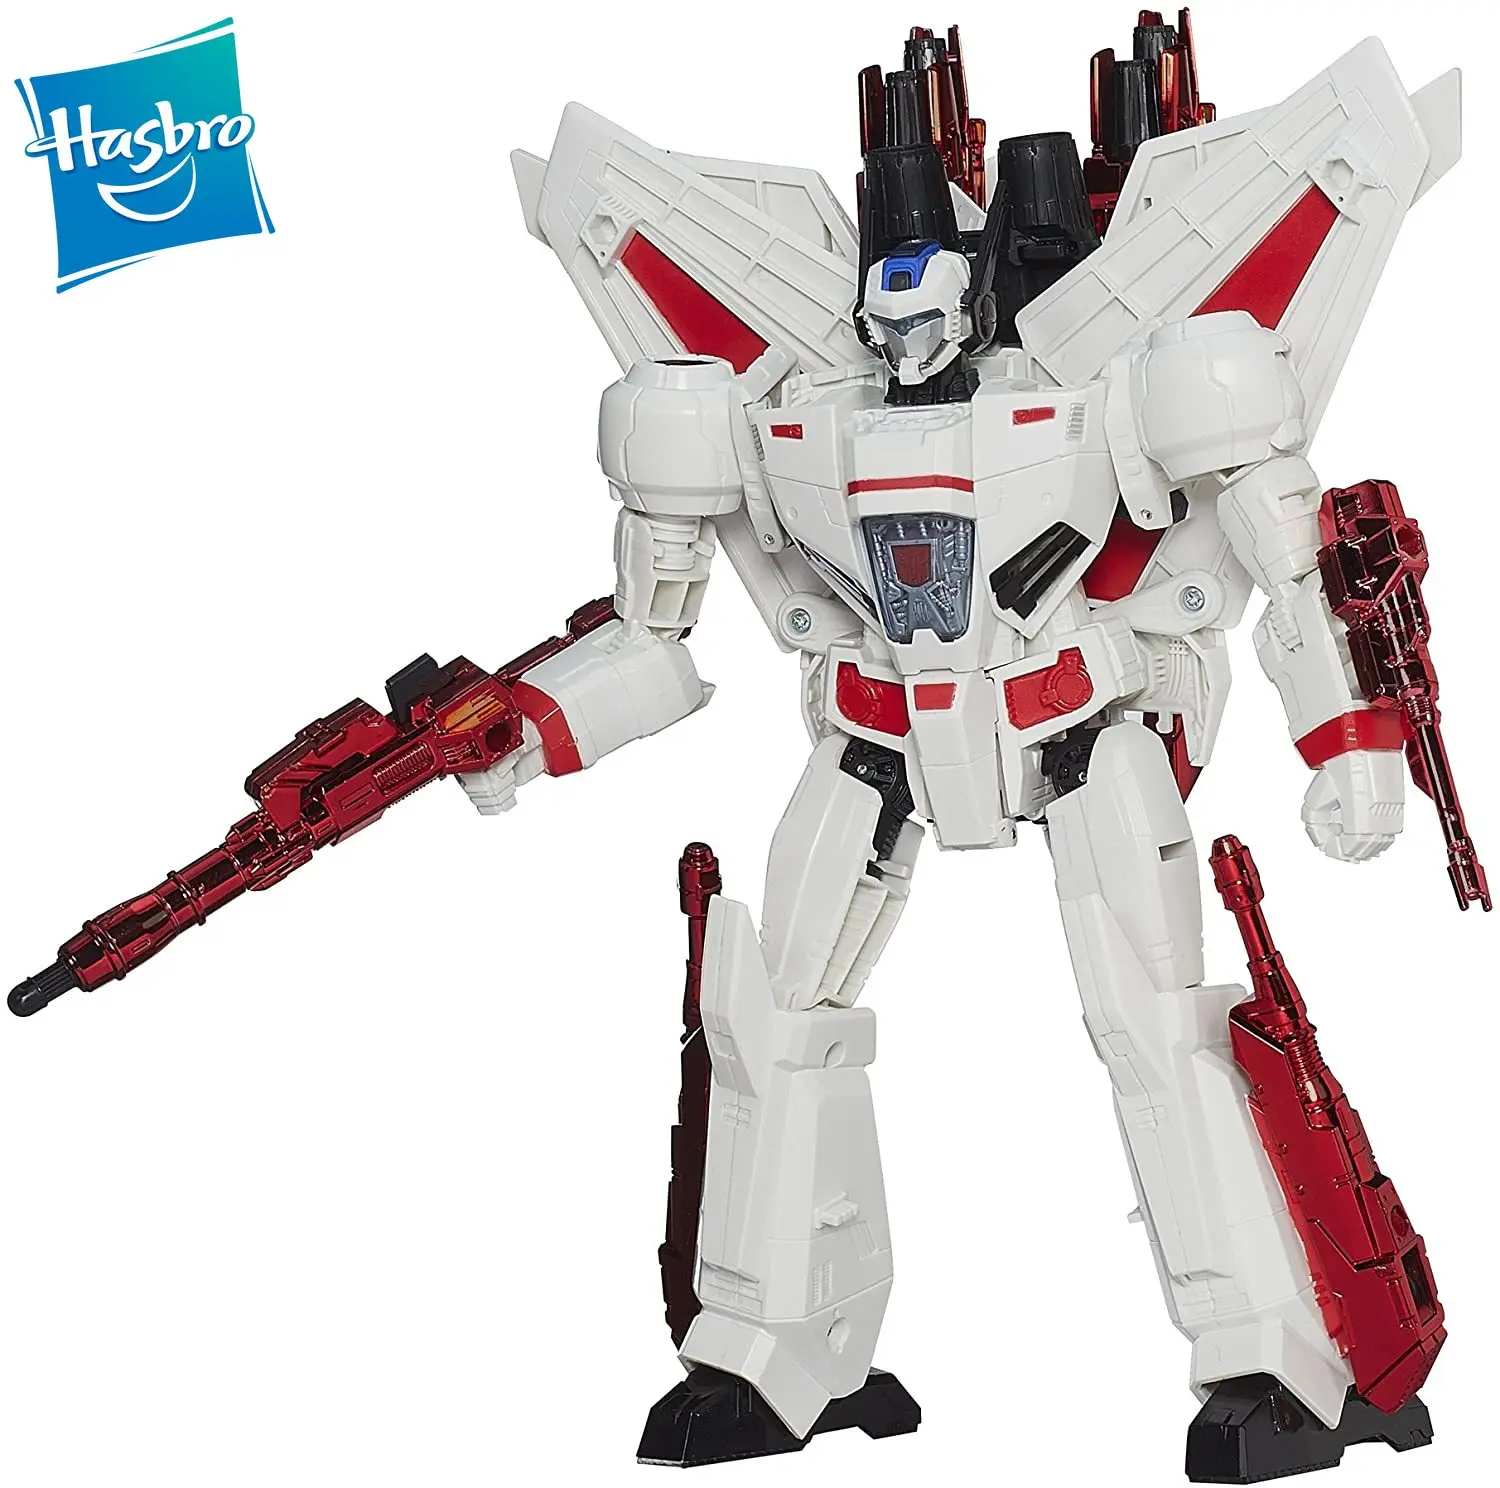 

Hasbro Transformers 30th Anniversary Generations Leader Class Jetfire Bolide Action Figure Robot Model Toy 25cm